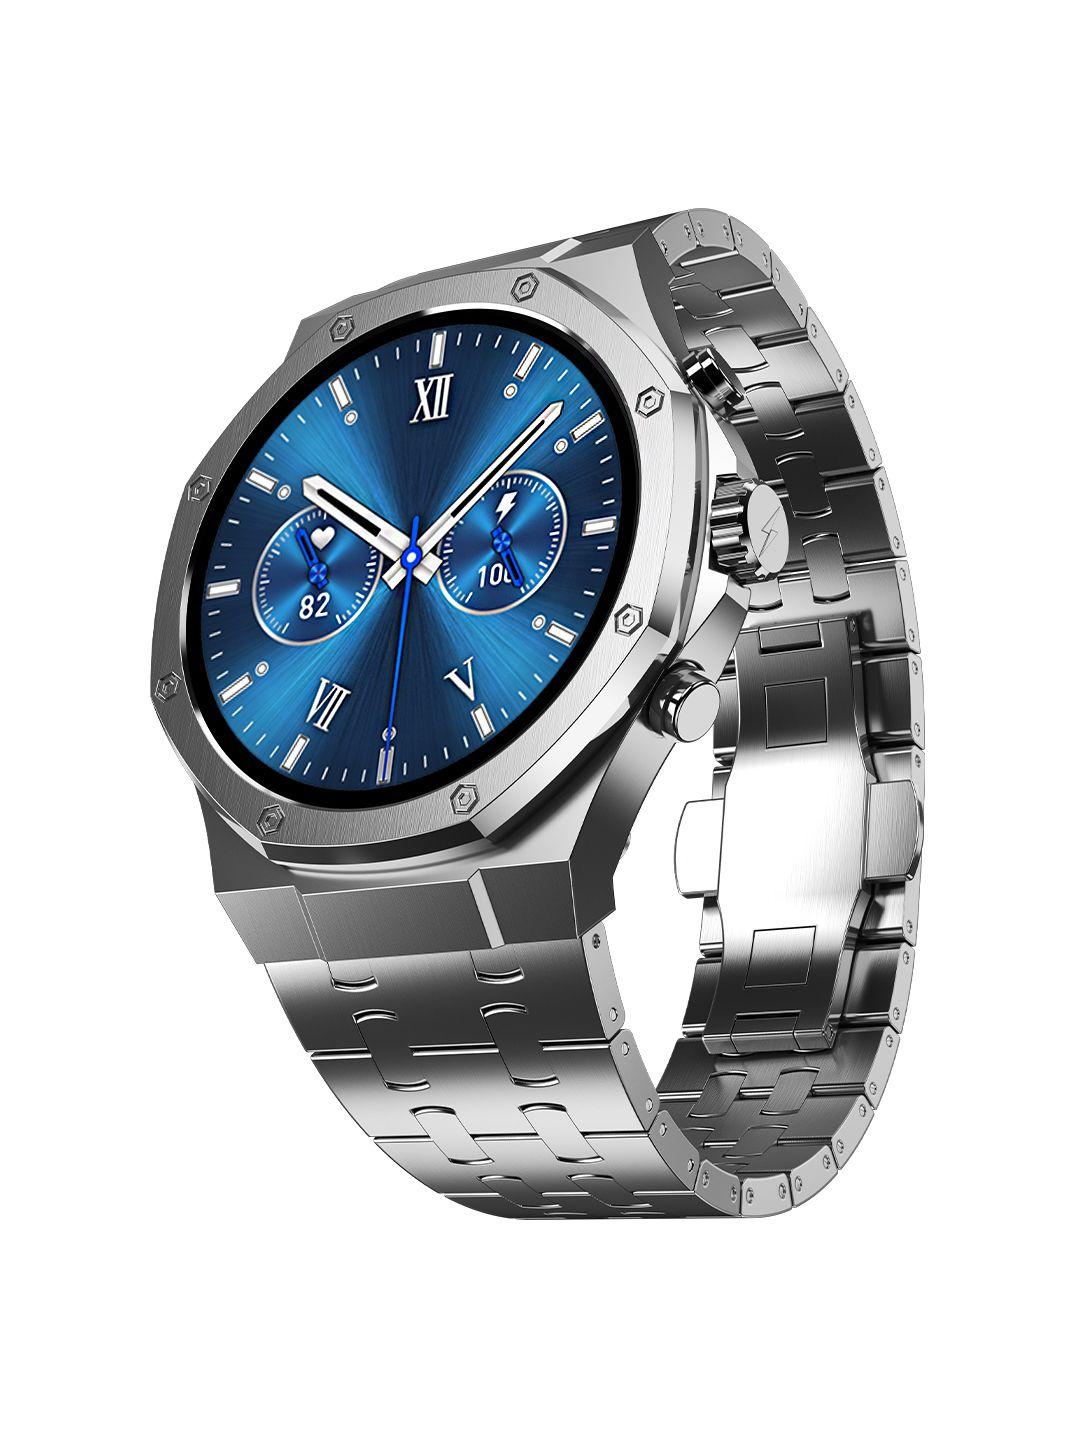 fire-boltt royale luxury stainless steel smart watch with 1.43 amoled display